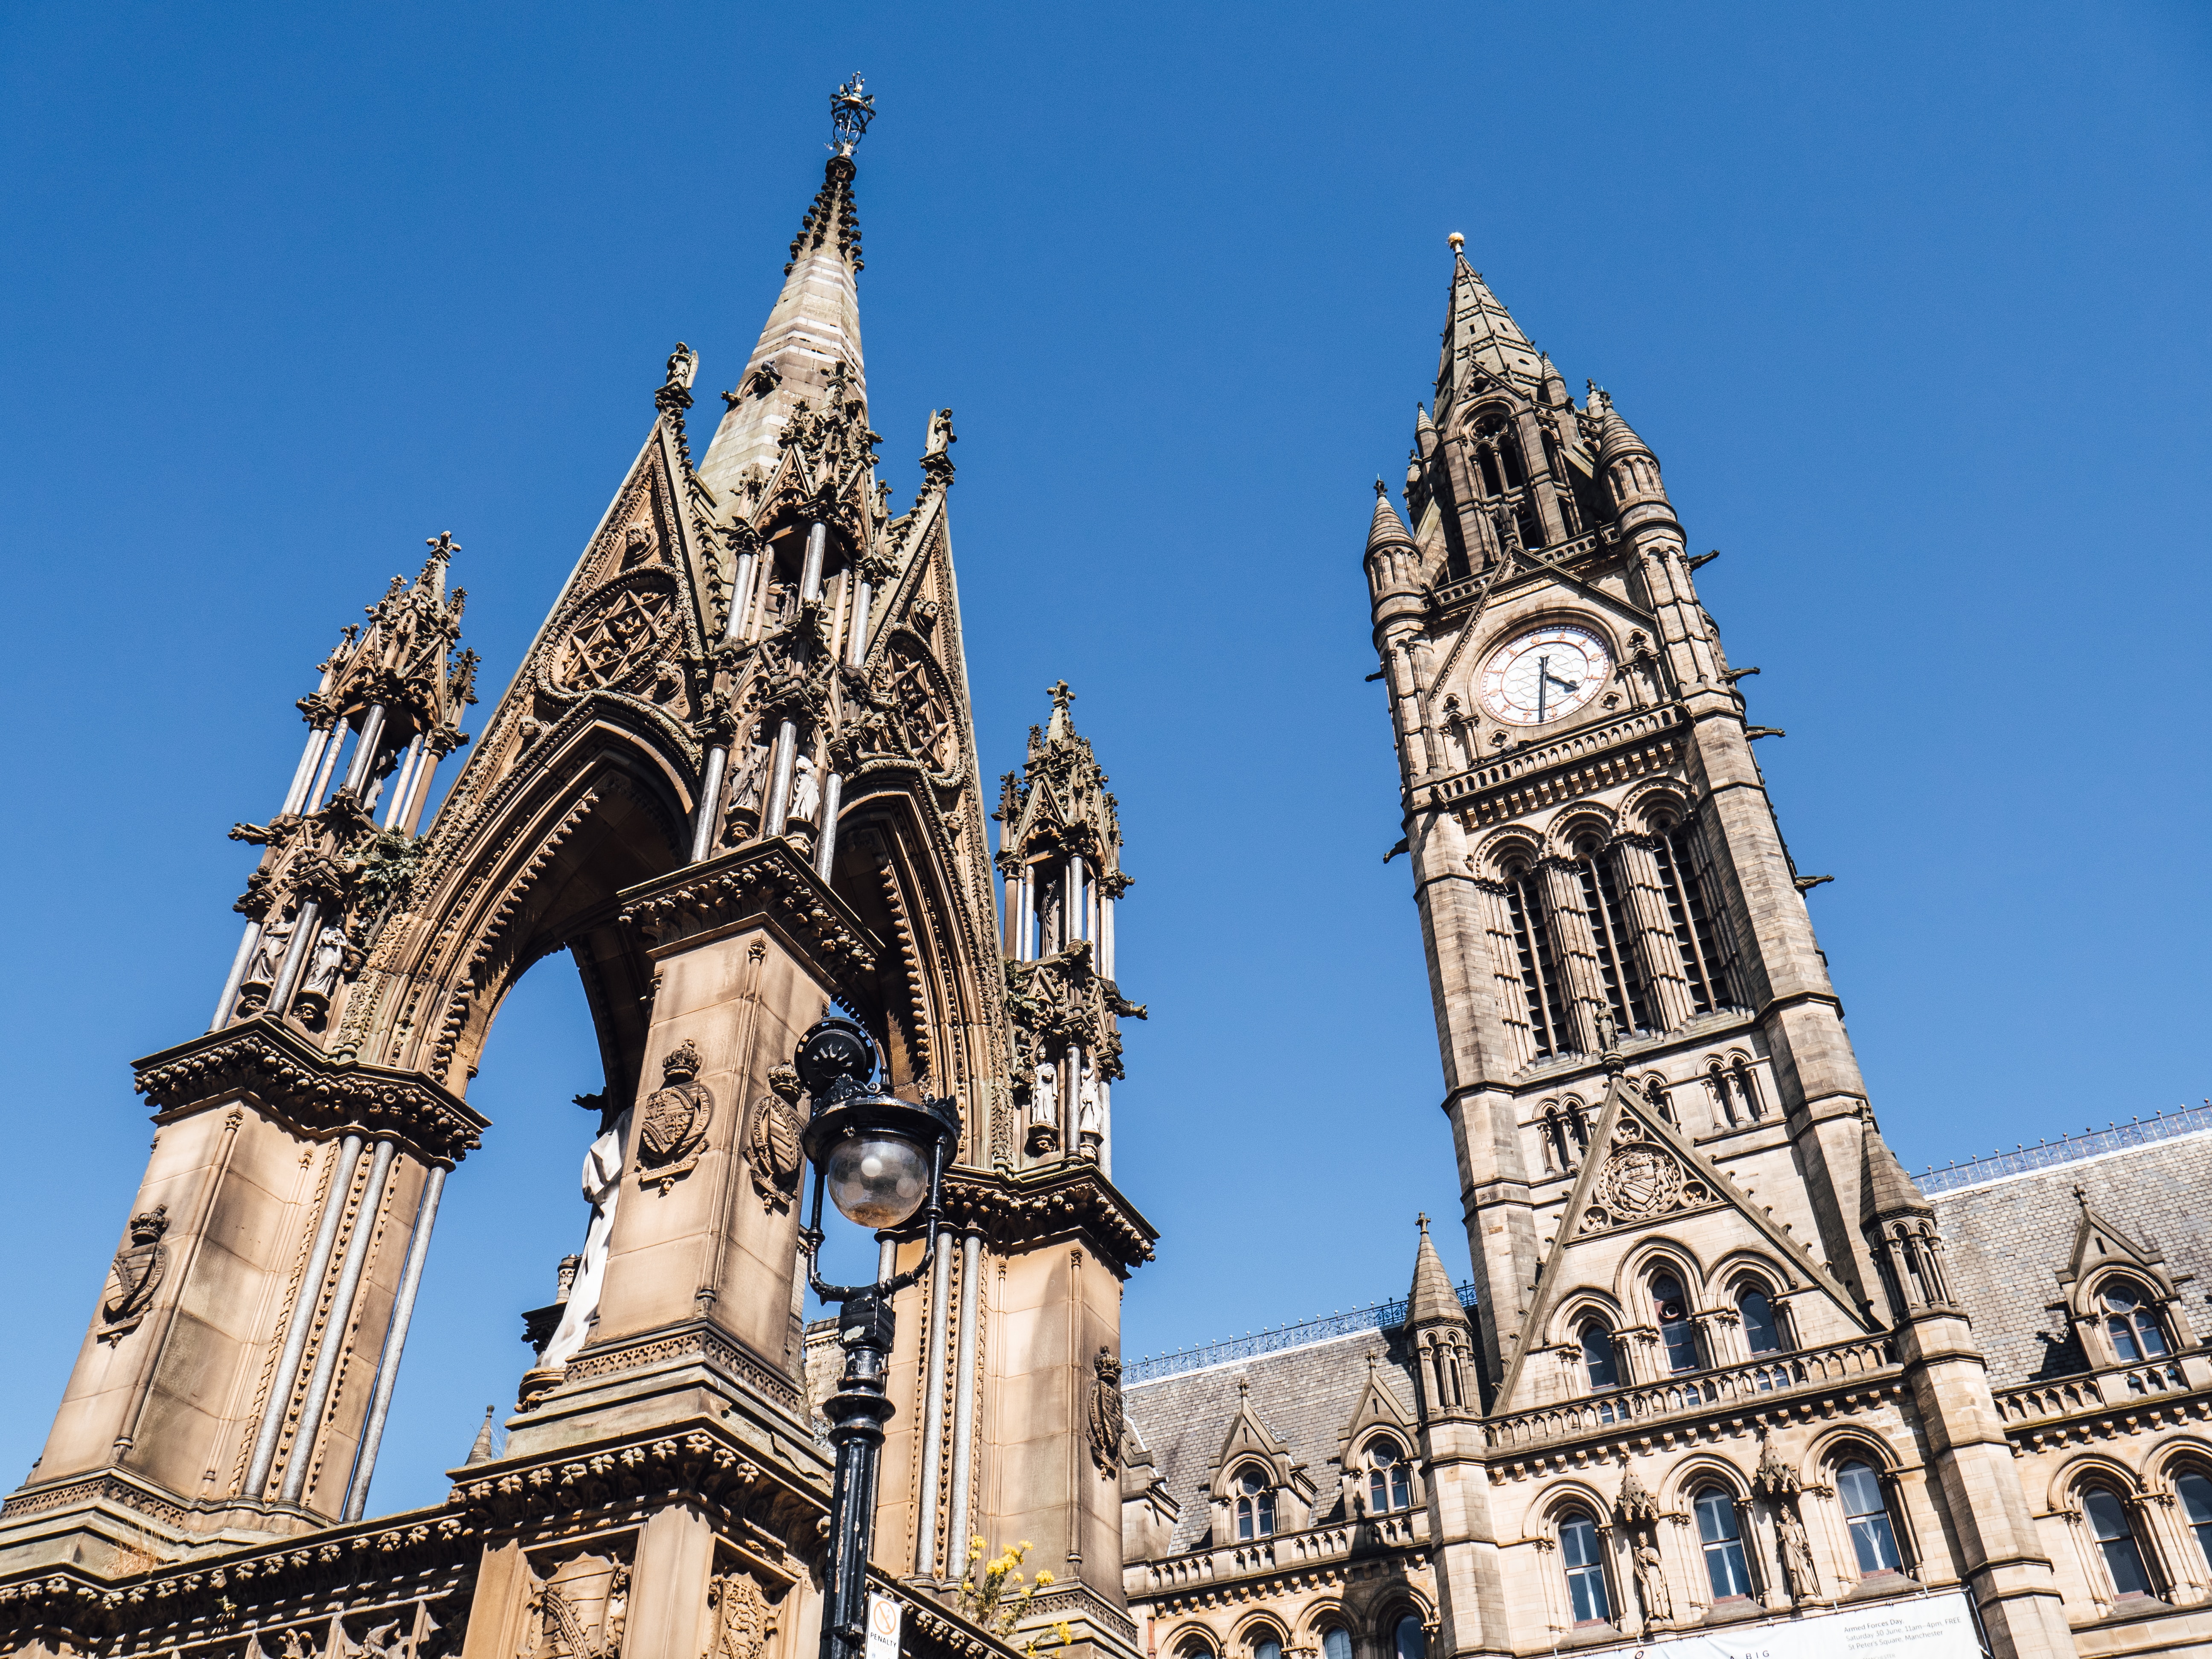 The clock tower of Manchester Town Hall with blue sky